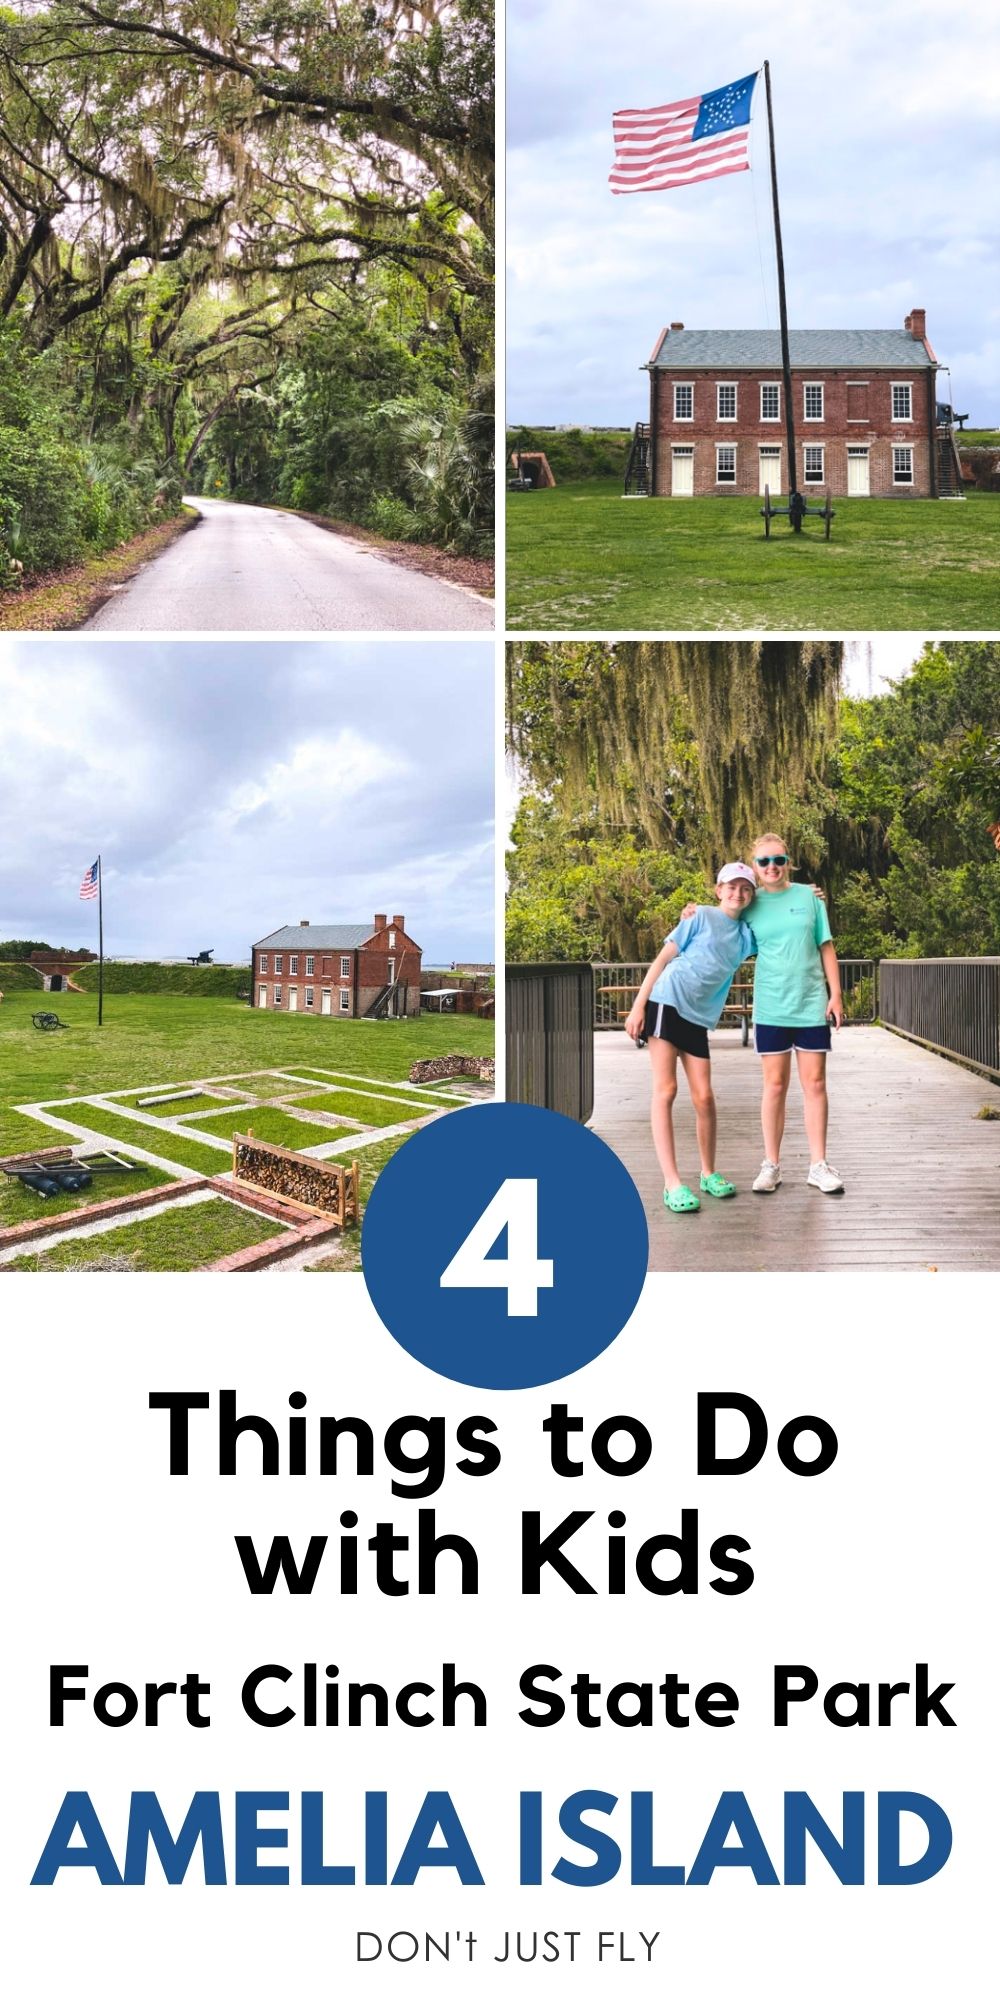 A photo collage shows several scenes from Fort Clinch State Park.